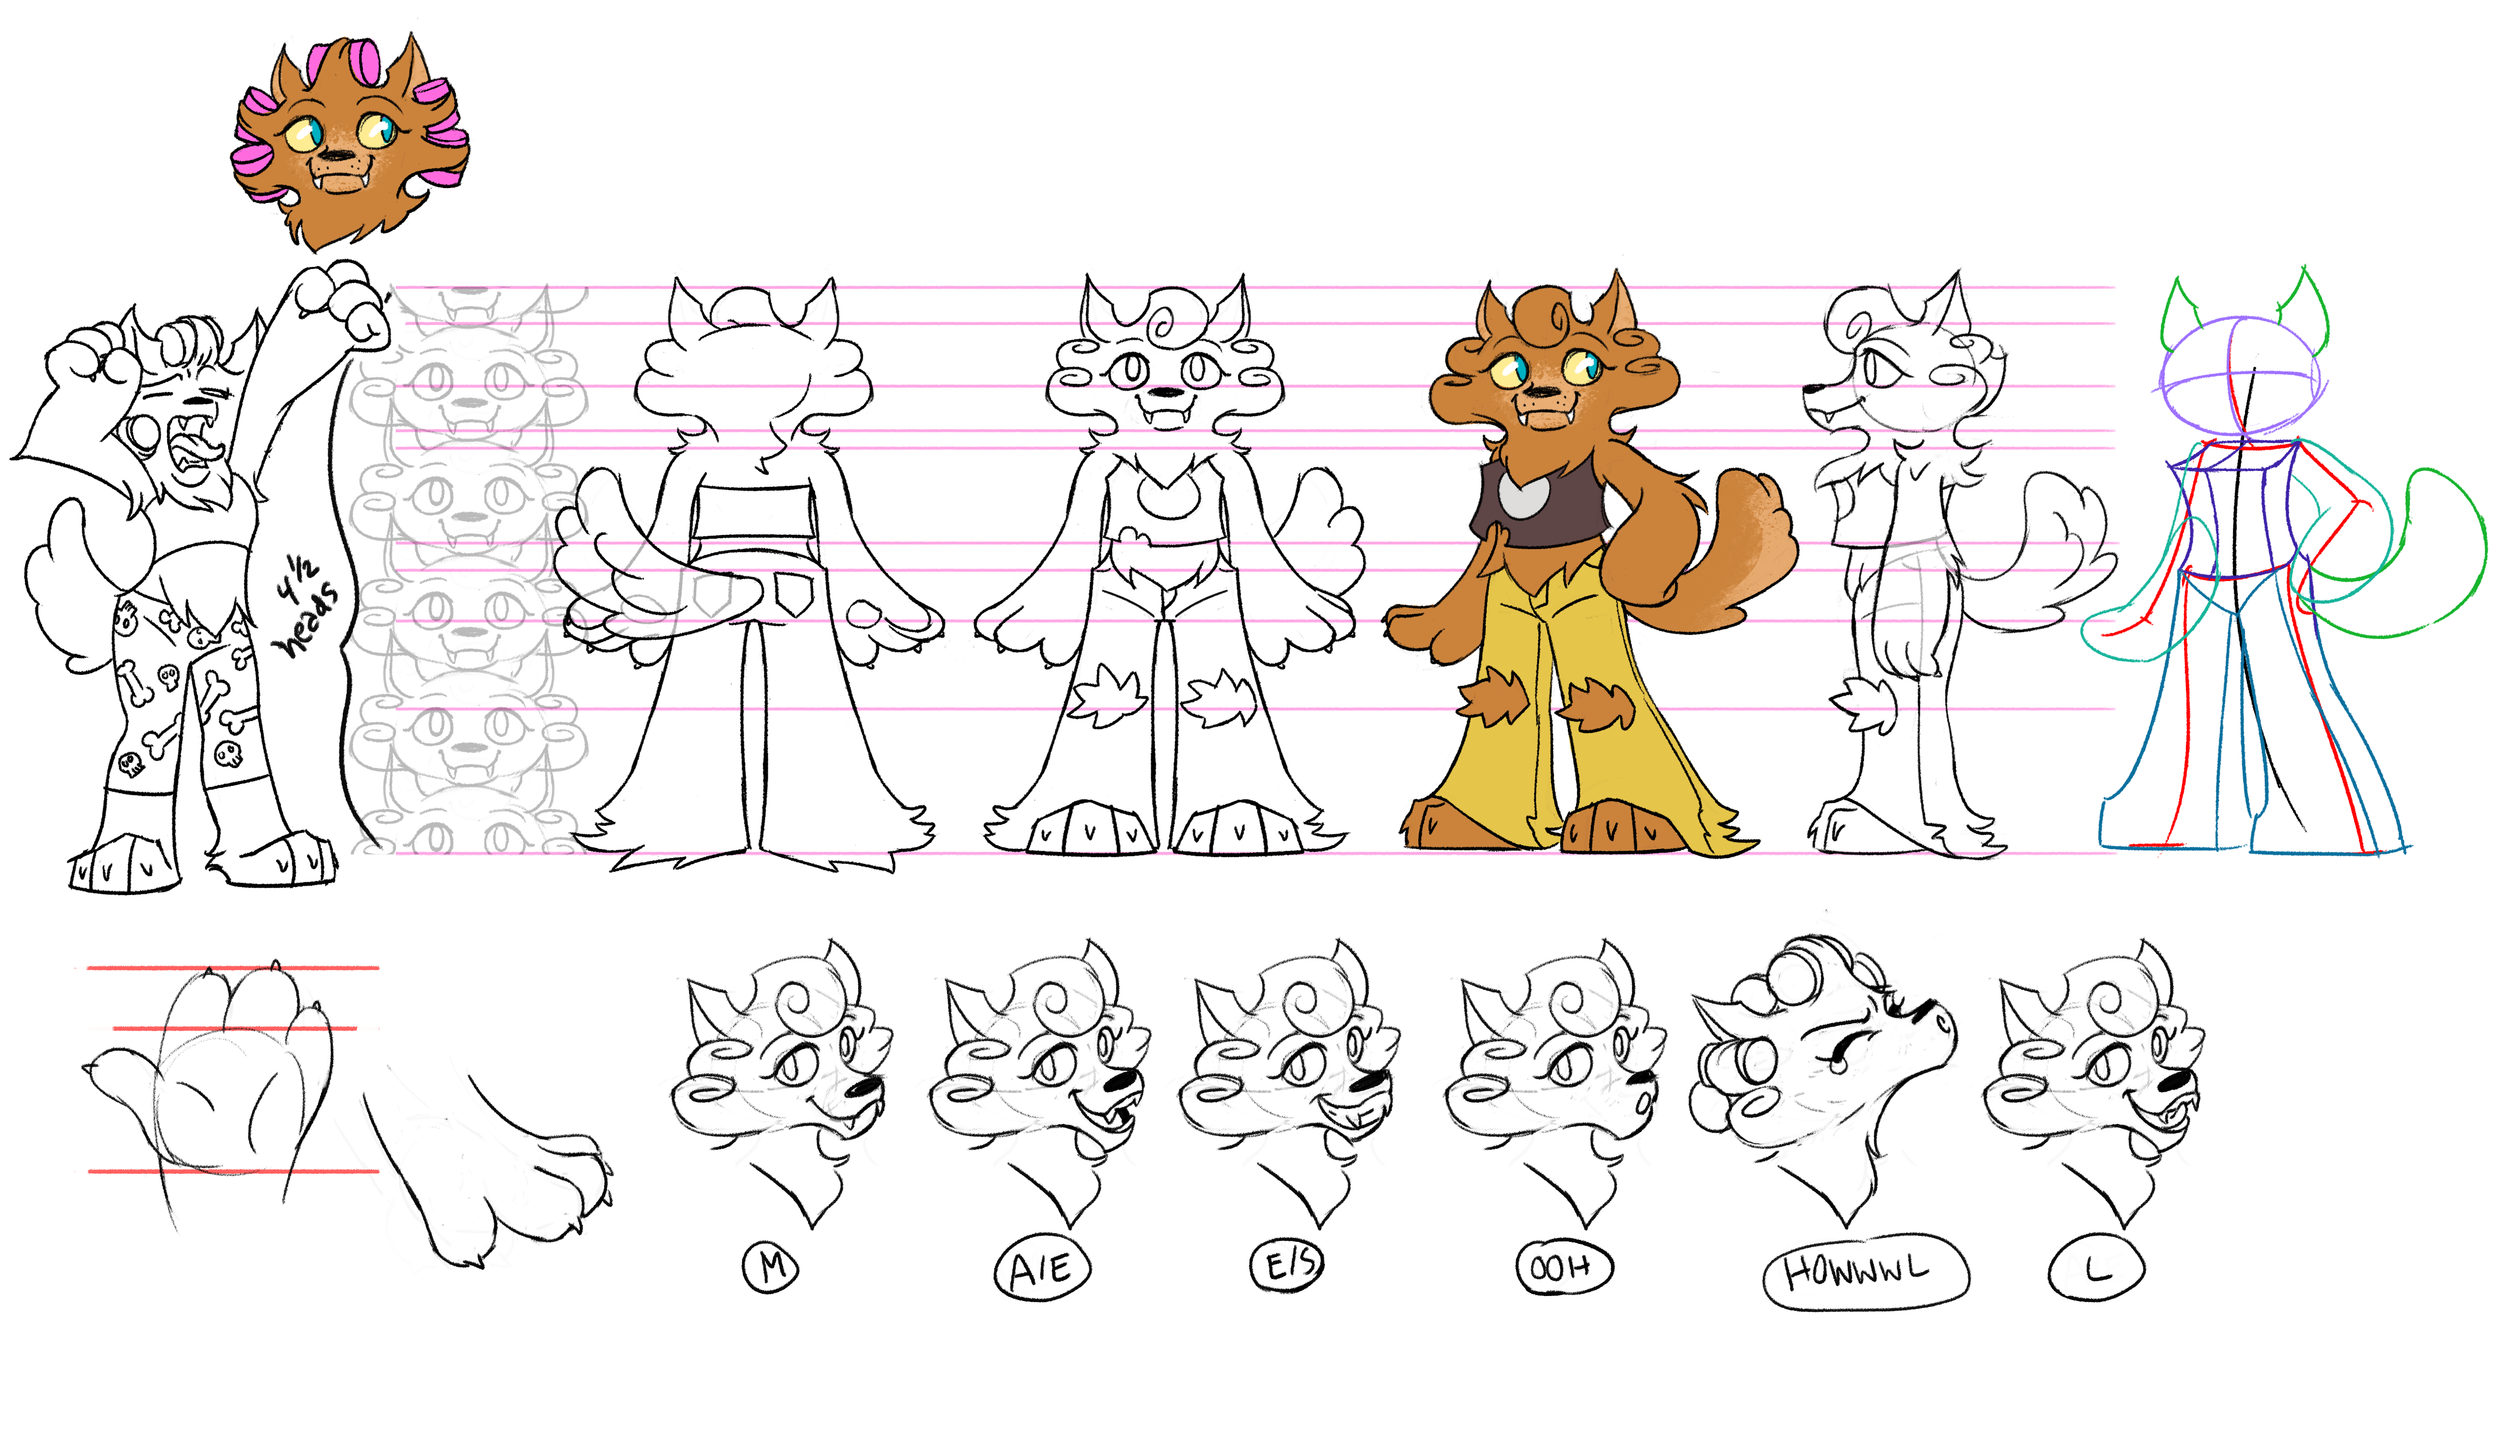 LadiesNight_CharacterModelSheets_werrica.png